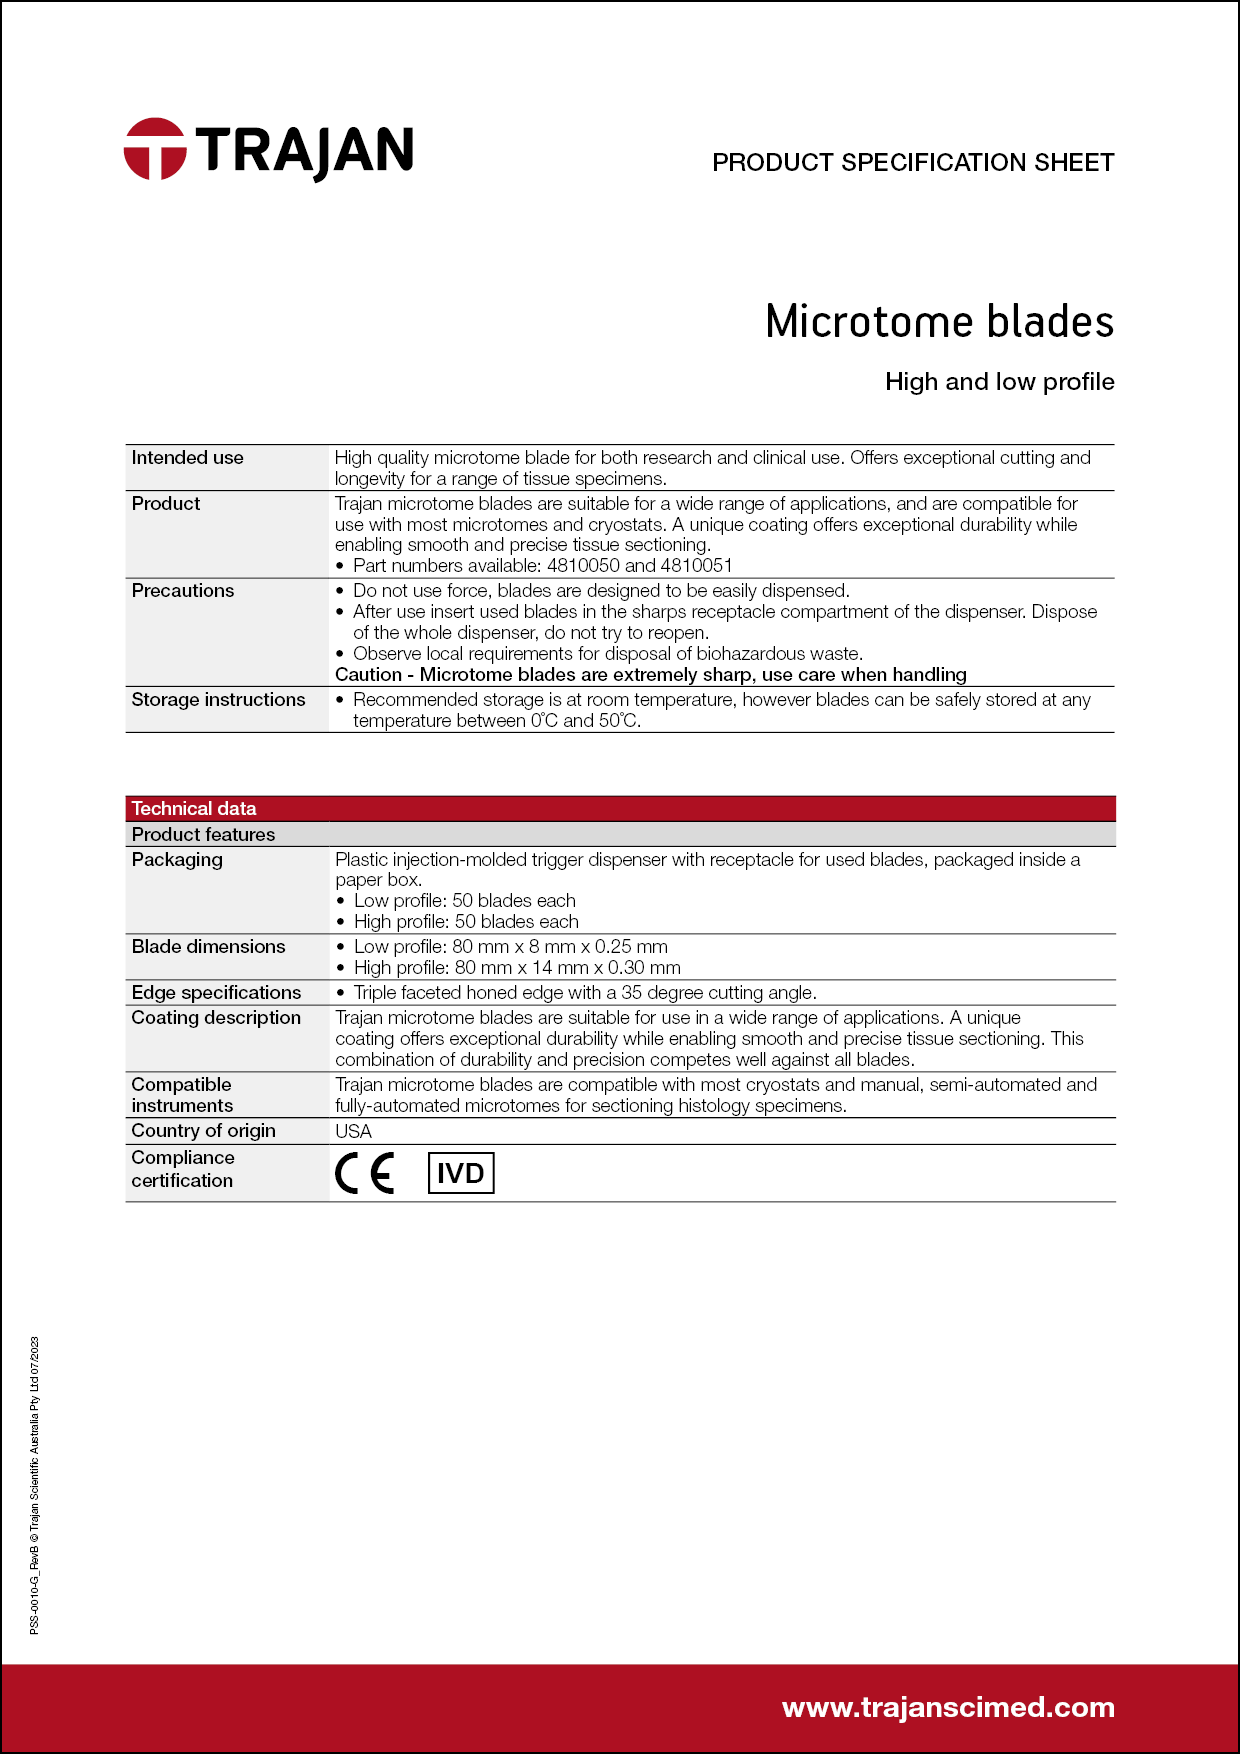 Product Specification Sheet - Microtome blades